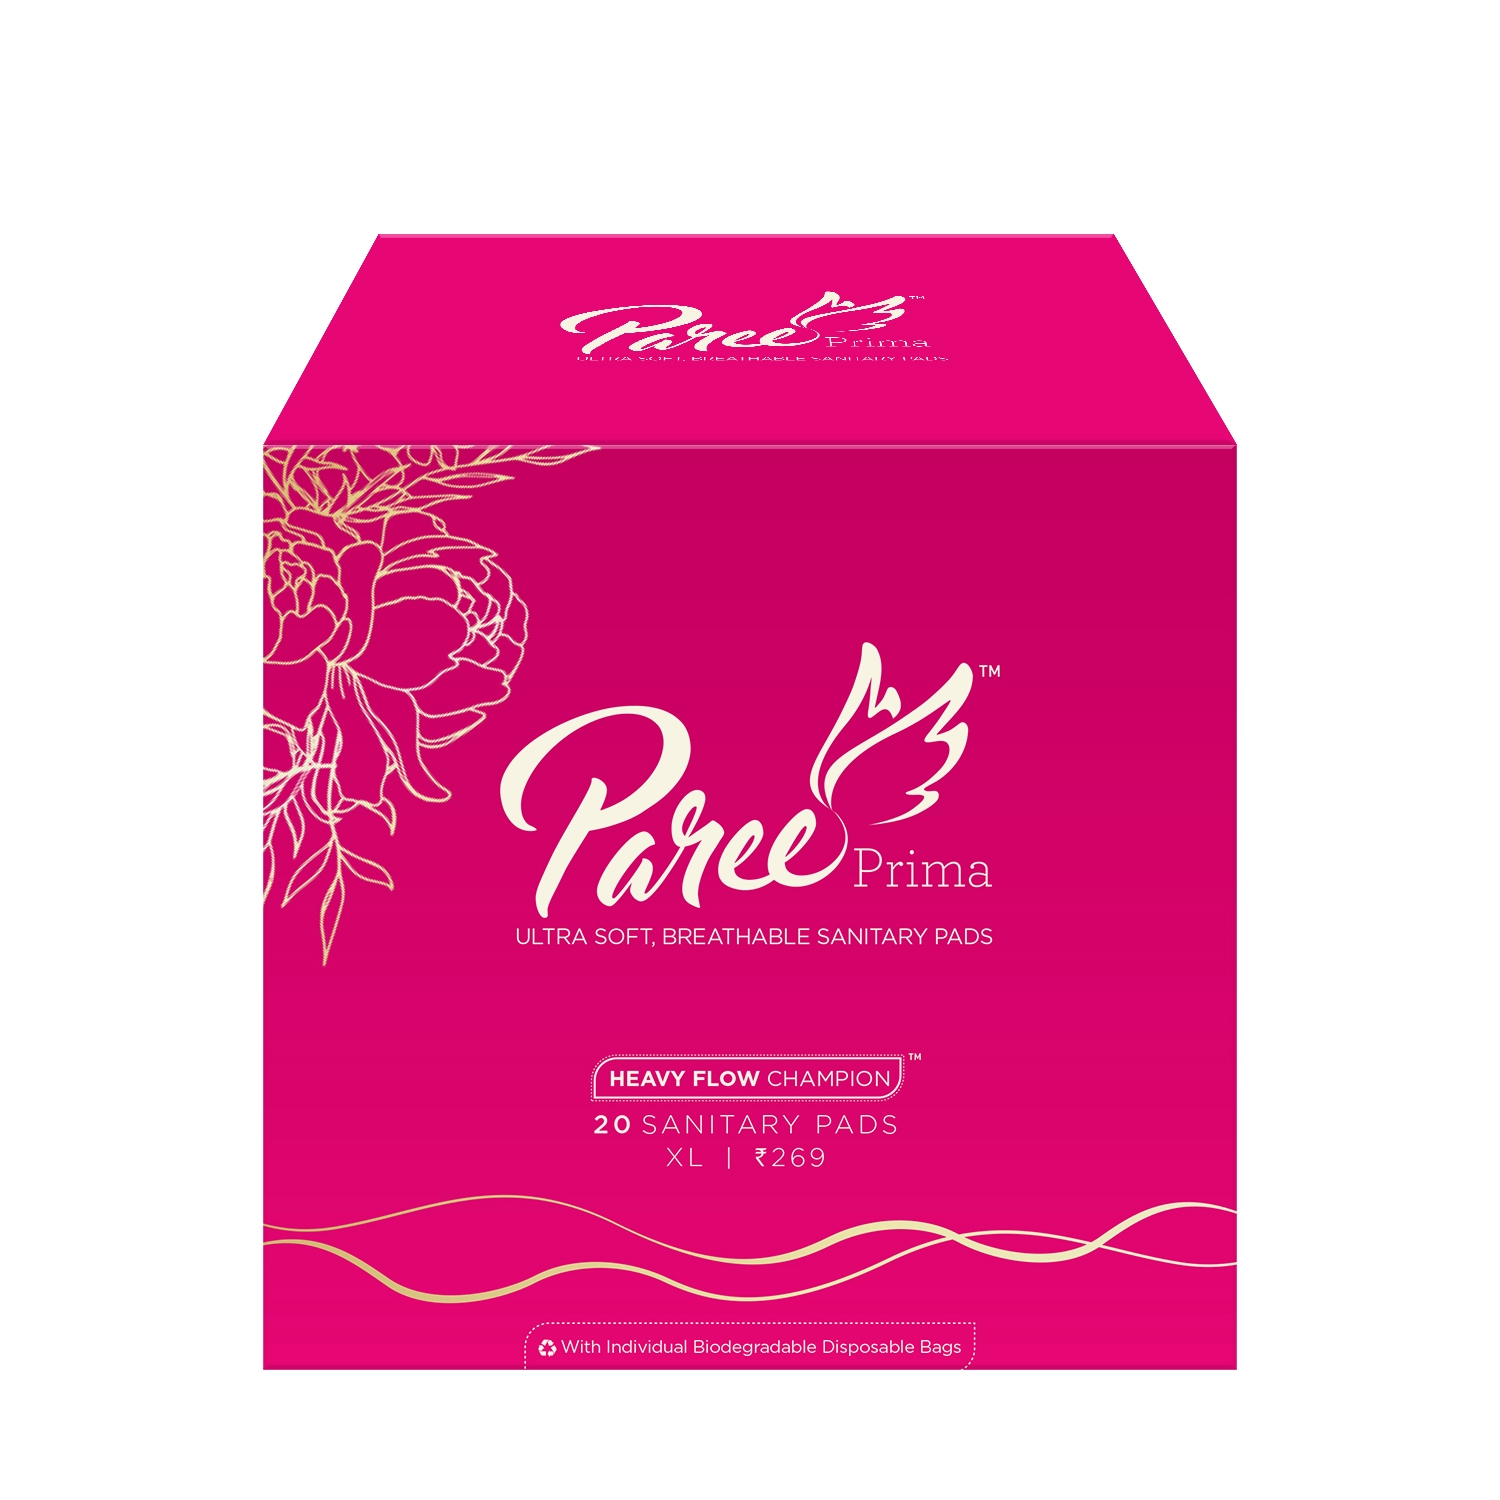 Paree | Paree Prima Premium Ultra Soft Breathable XL Sanitary Pads for Heavy Flow, With Biodegradable Disposable Bags, 20 Pads 0